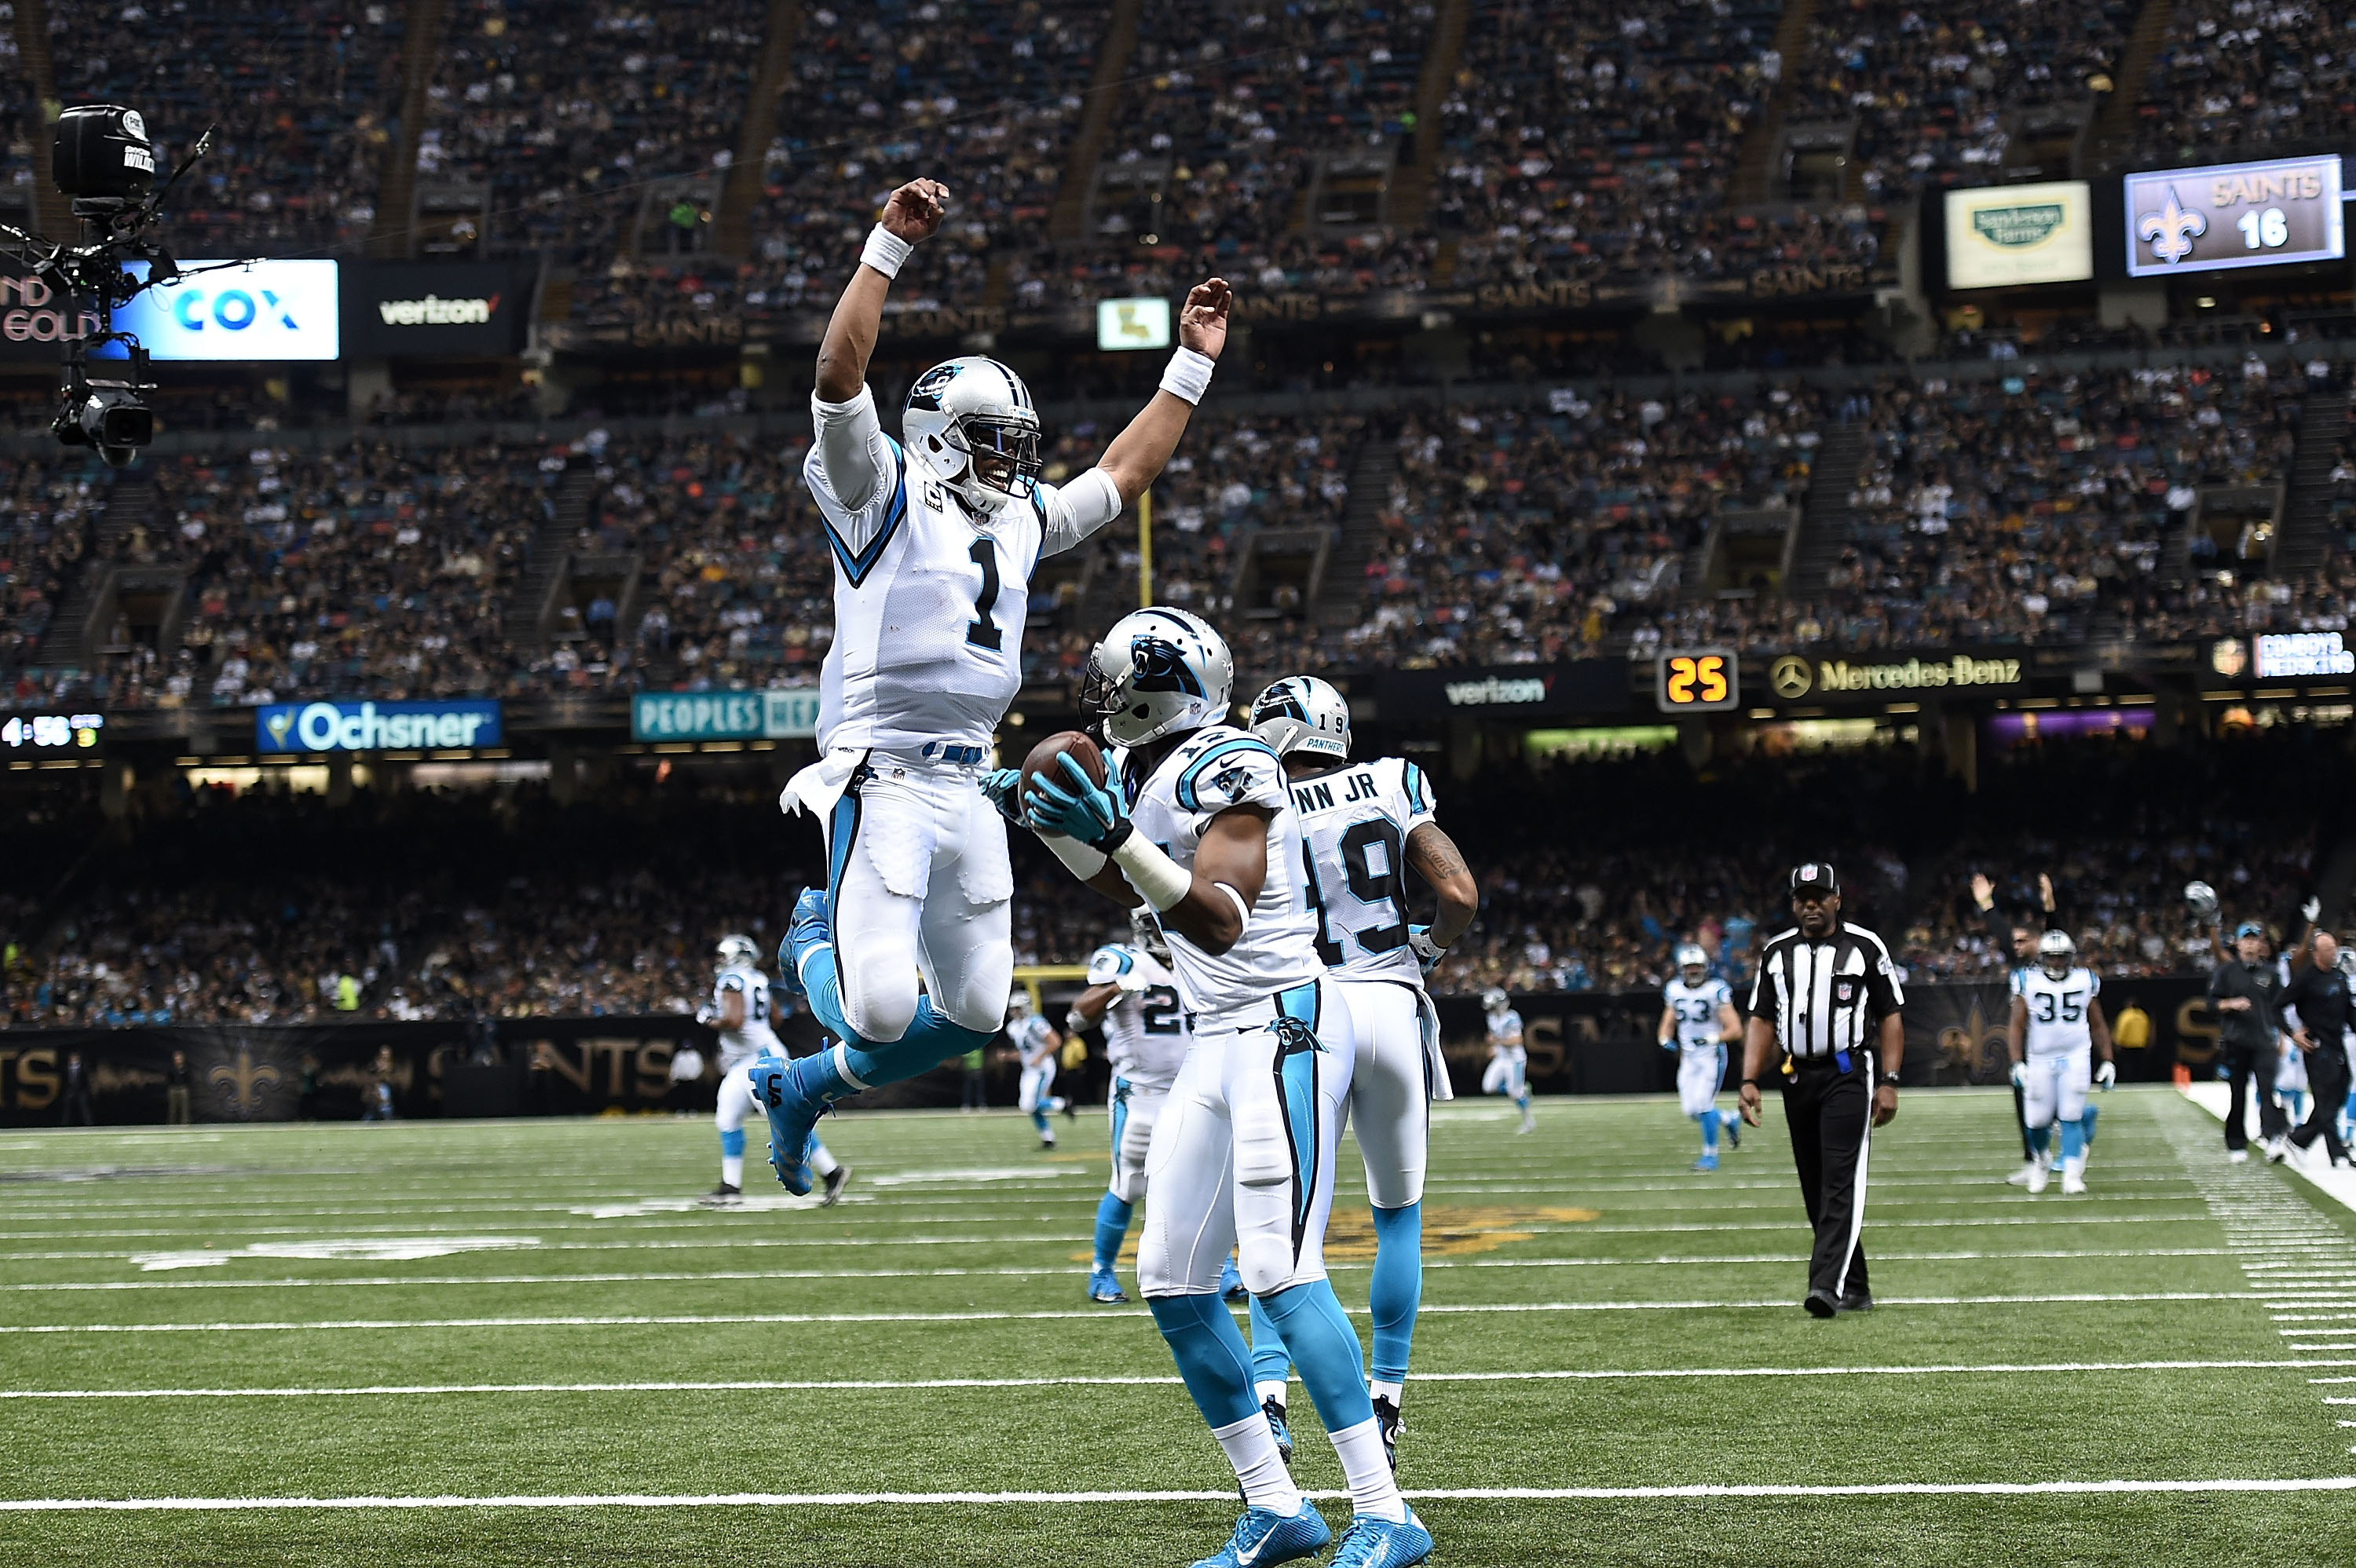 Panthers Game Sunday Declared 'Extraordinary Event'